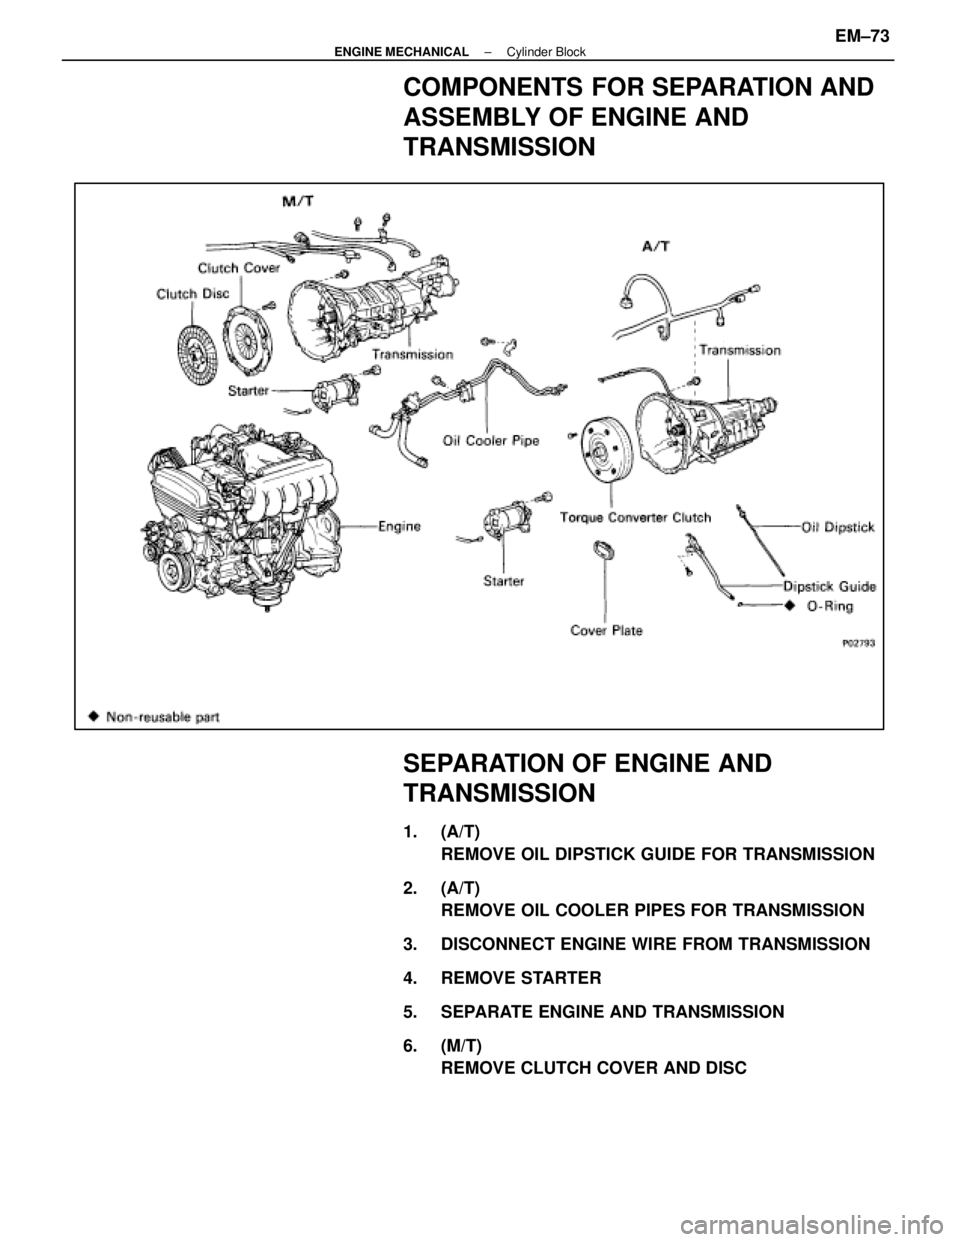 LEXUS SC400 1991  Service Service Manual 
COMPONENTS FOR SEPARATION AND
ASSEMBLY OF ENGINE AND
TRANSMISSION
SEPARATION OF ENGINE AND
TRANSMISSION
1. (A/T)REMOVE OIL DIPSTICK GUIDE FOR TRANSMISSION
2. (A/T) REMOVE OIL COOLER PIPES FOR TRANSMI